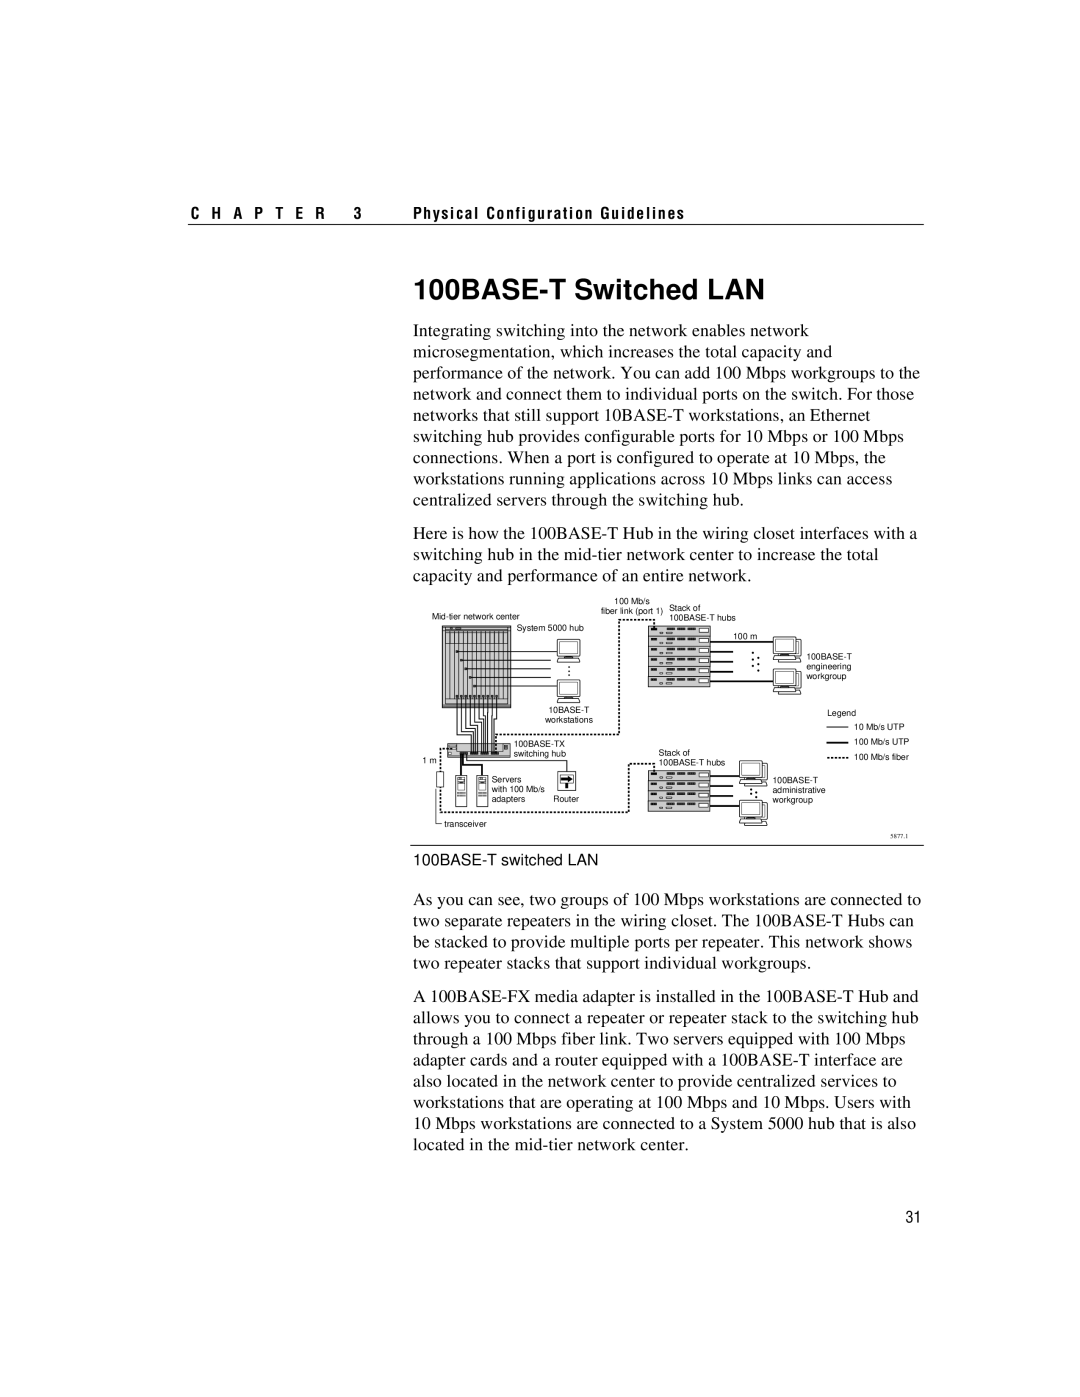 Intel 100BASE-TX manual 100BASE-TSwitched LAN, C H A P T E R, Physical Configuration Guidelines 